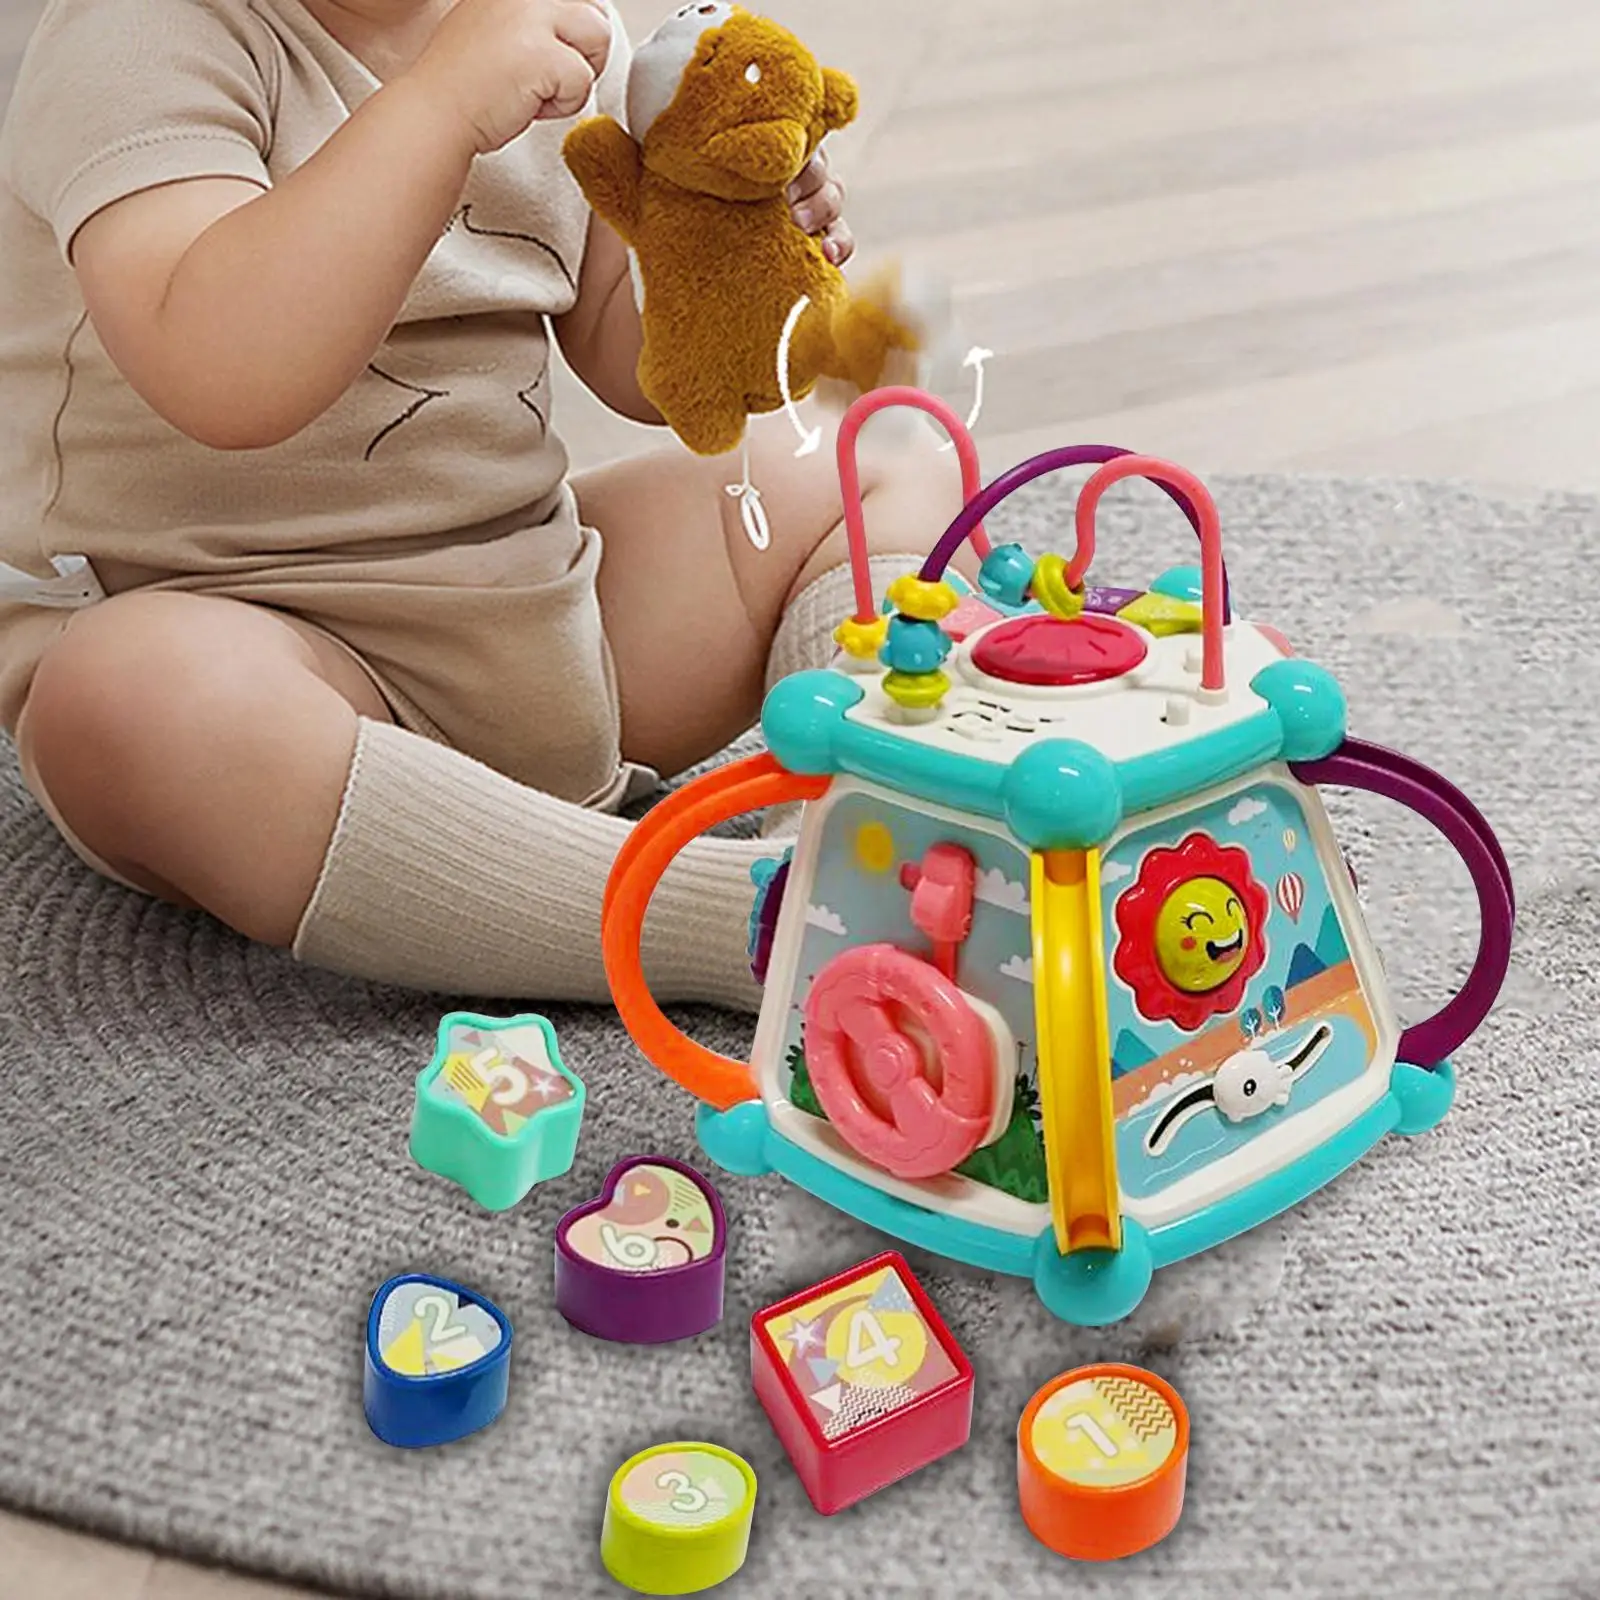 Activity Cube Toy Learning Puzzle Toy for Boys Girls Toddlers Gift